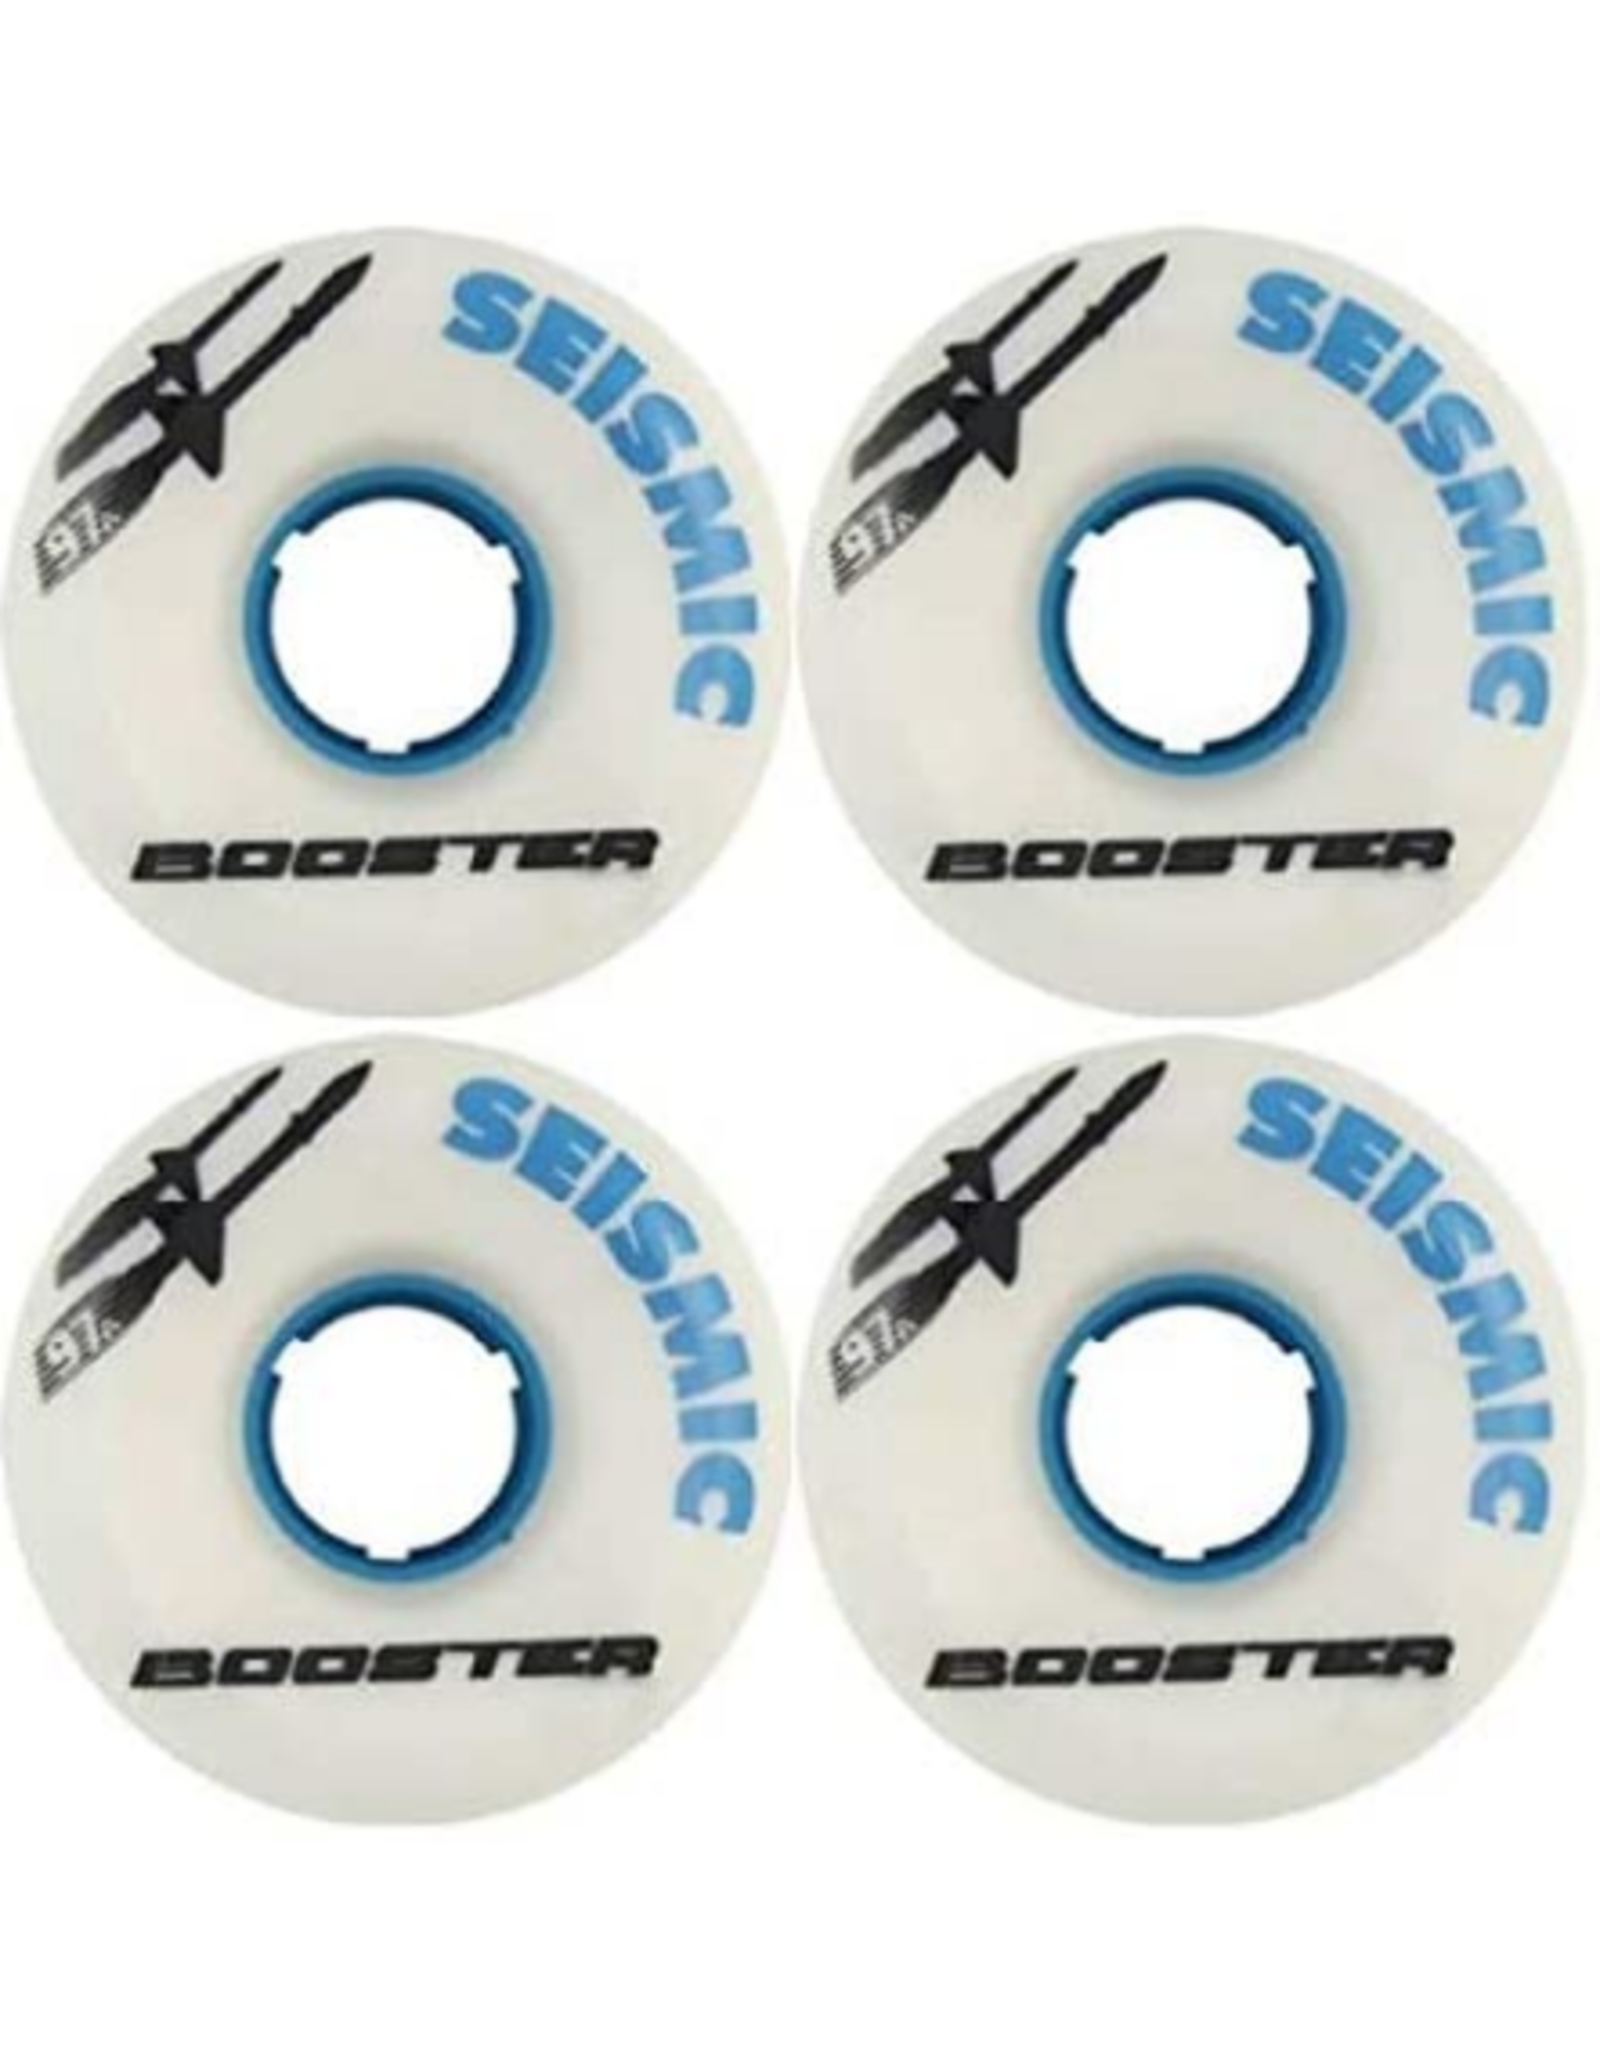 EASTERN SKATE SEISMIC BOOSTER 60mm 97a WHT/BLUE